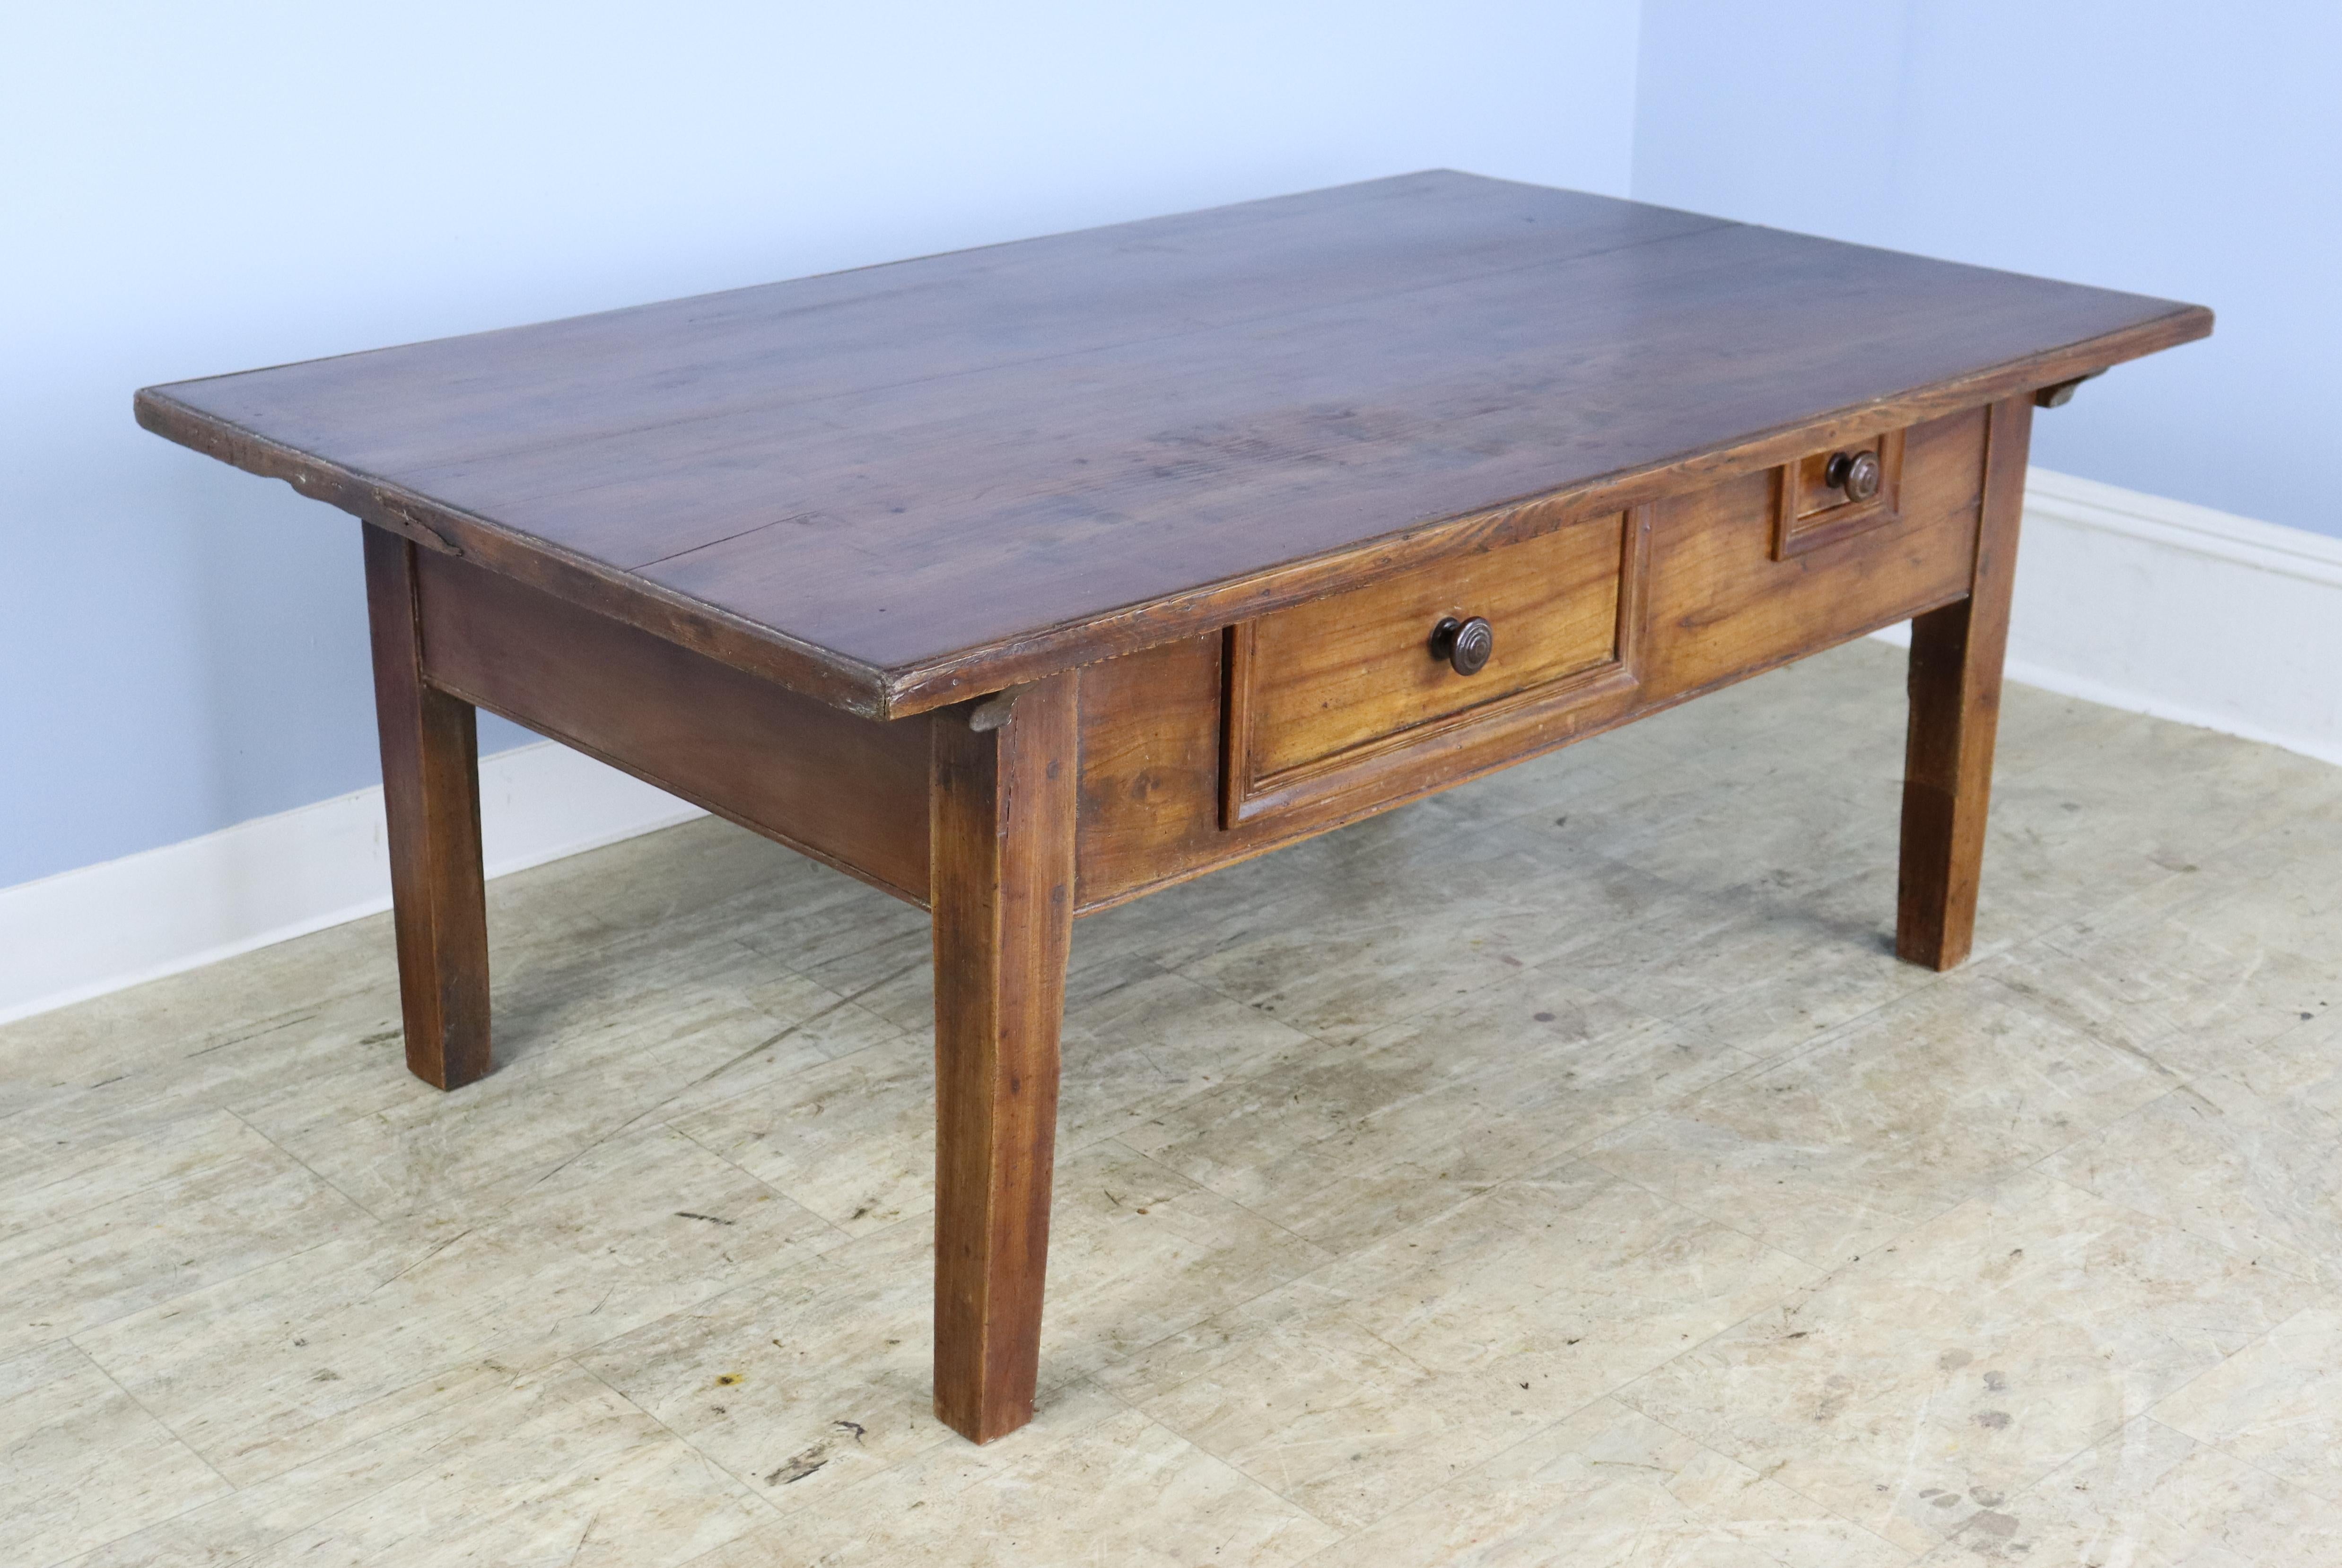 A beautifully grained Alsacian coffee table in mellow fruitwood. The top has wonderful color and patina, while the look of the front is punctuated by two sweet drawers. Chunky stylized legs complete the look.